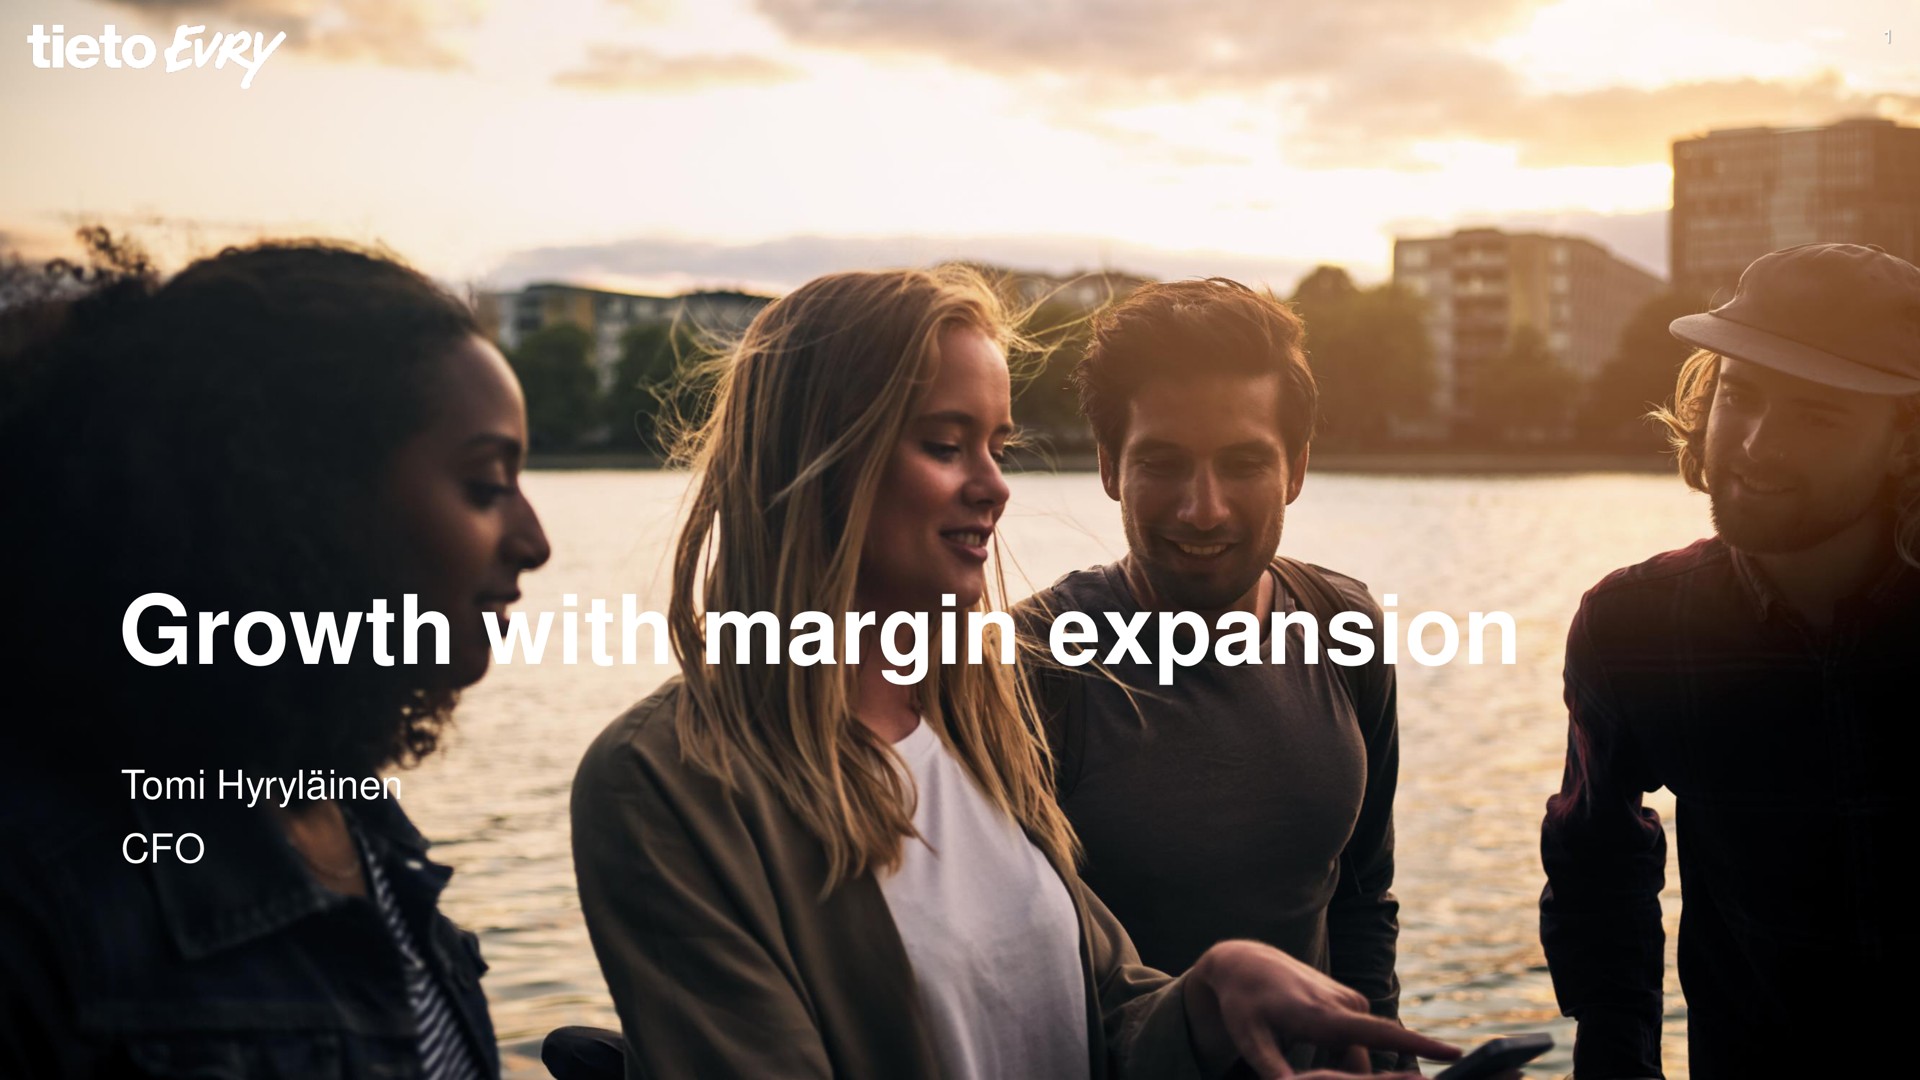 growth with margin expansion | Tietoevry